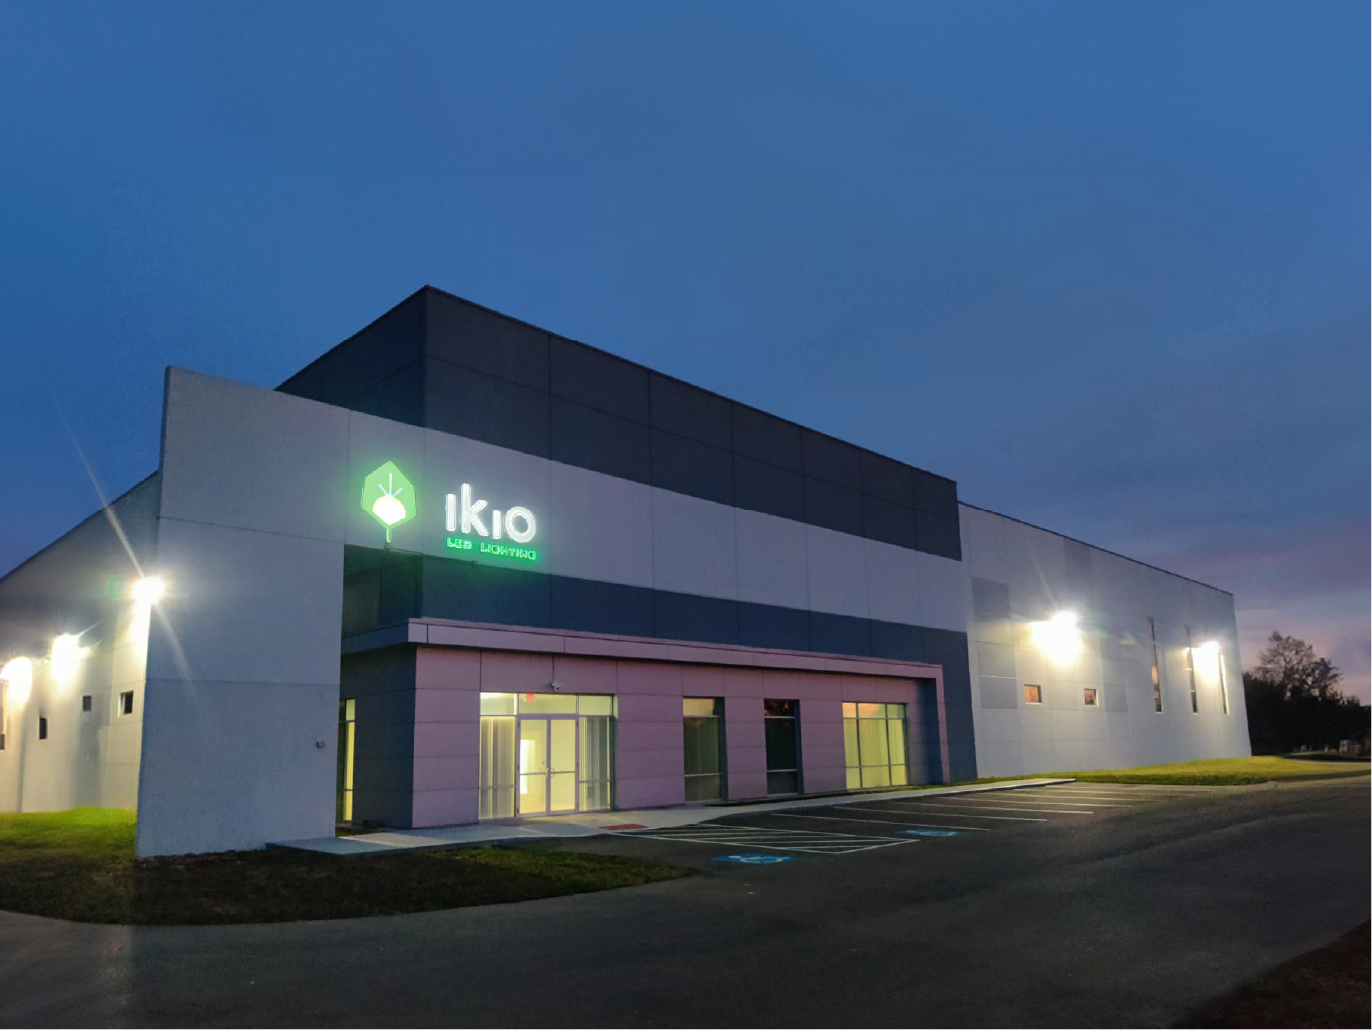 ikio State of Art Infrastructure